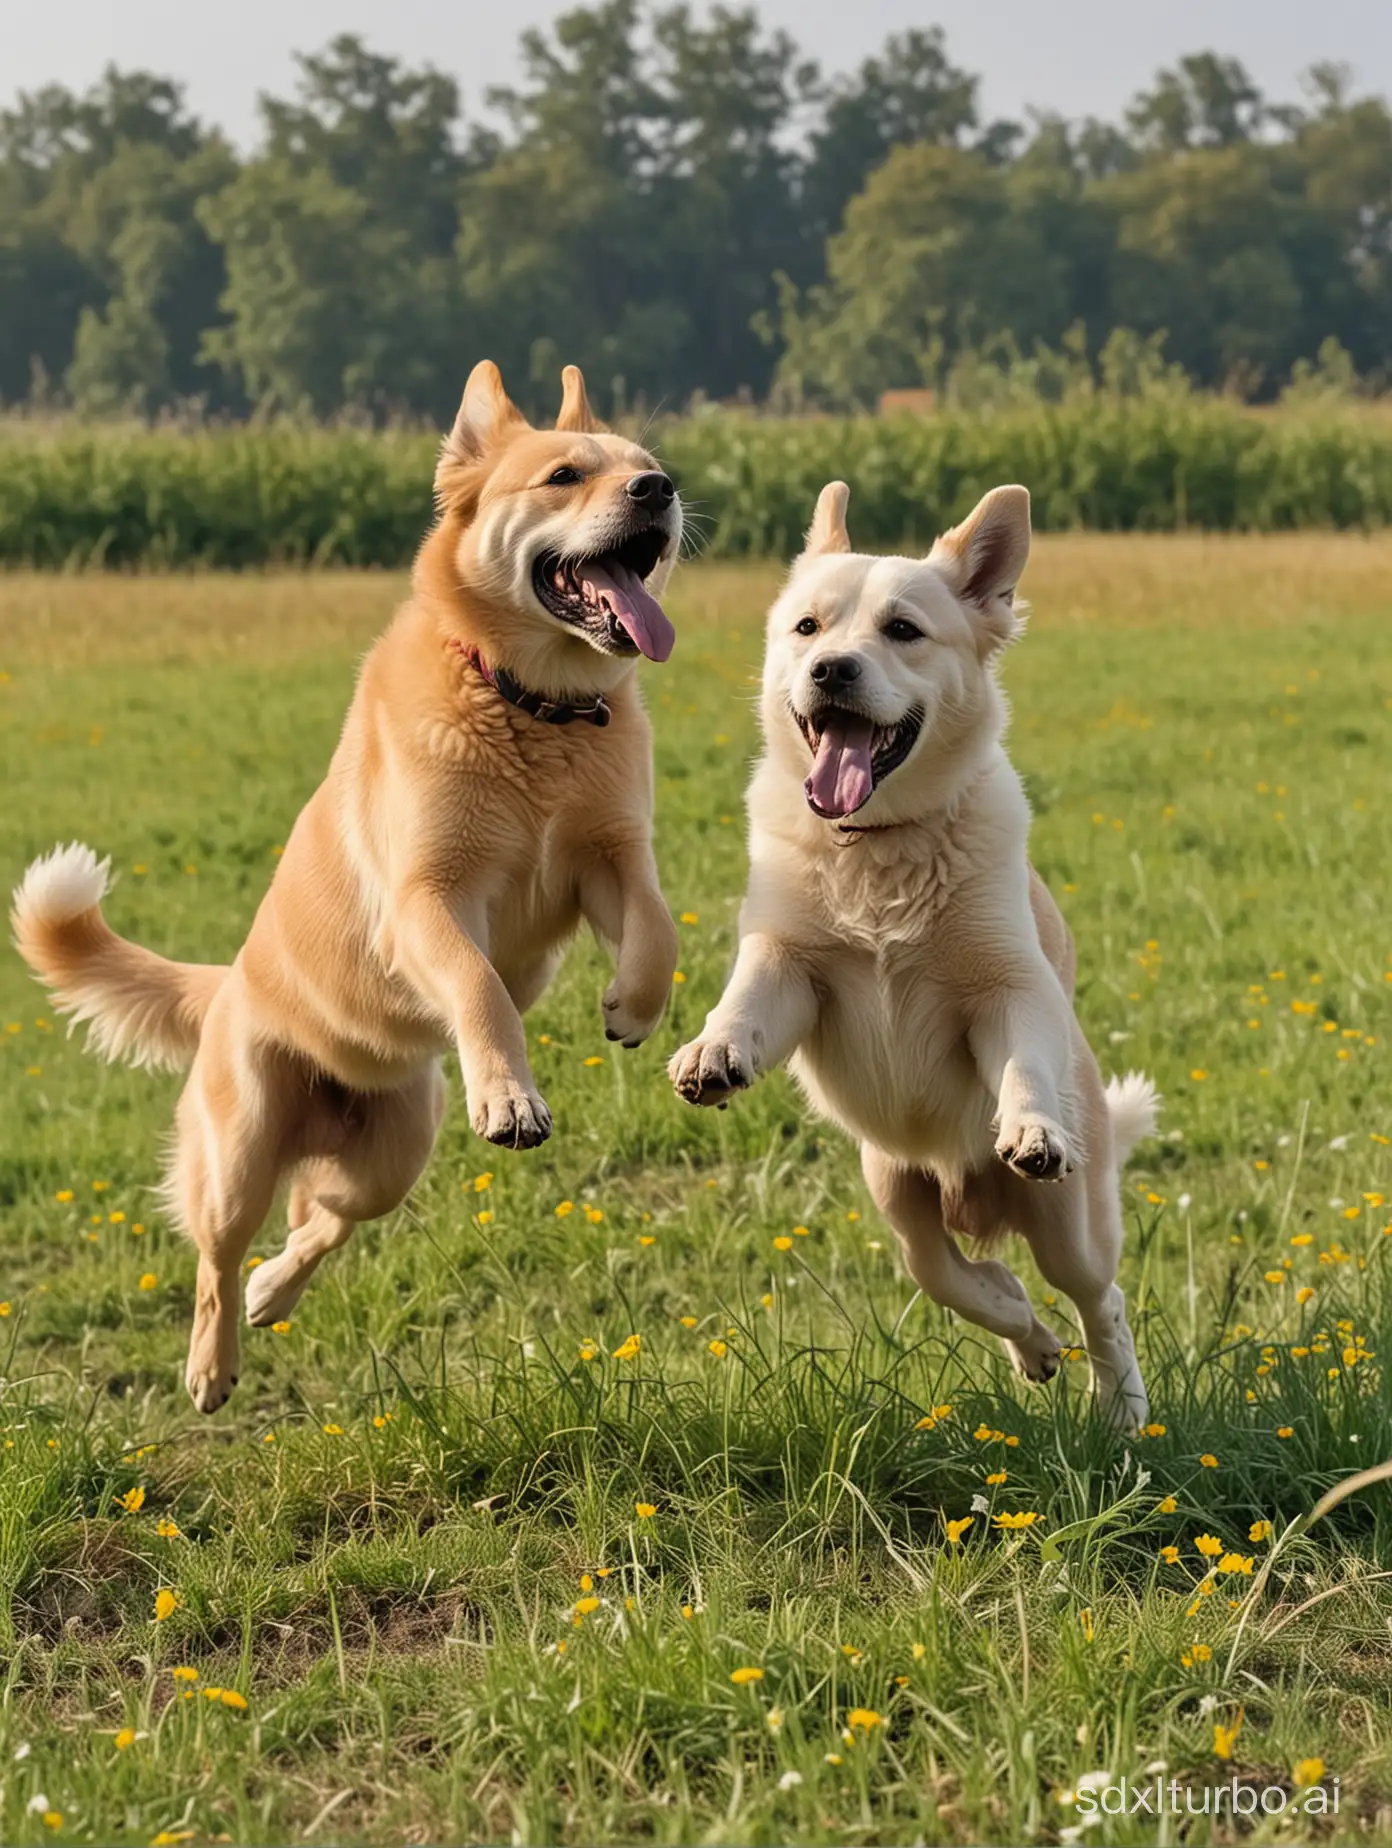 The playful dogs frolicking in the fields